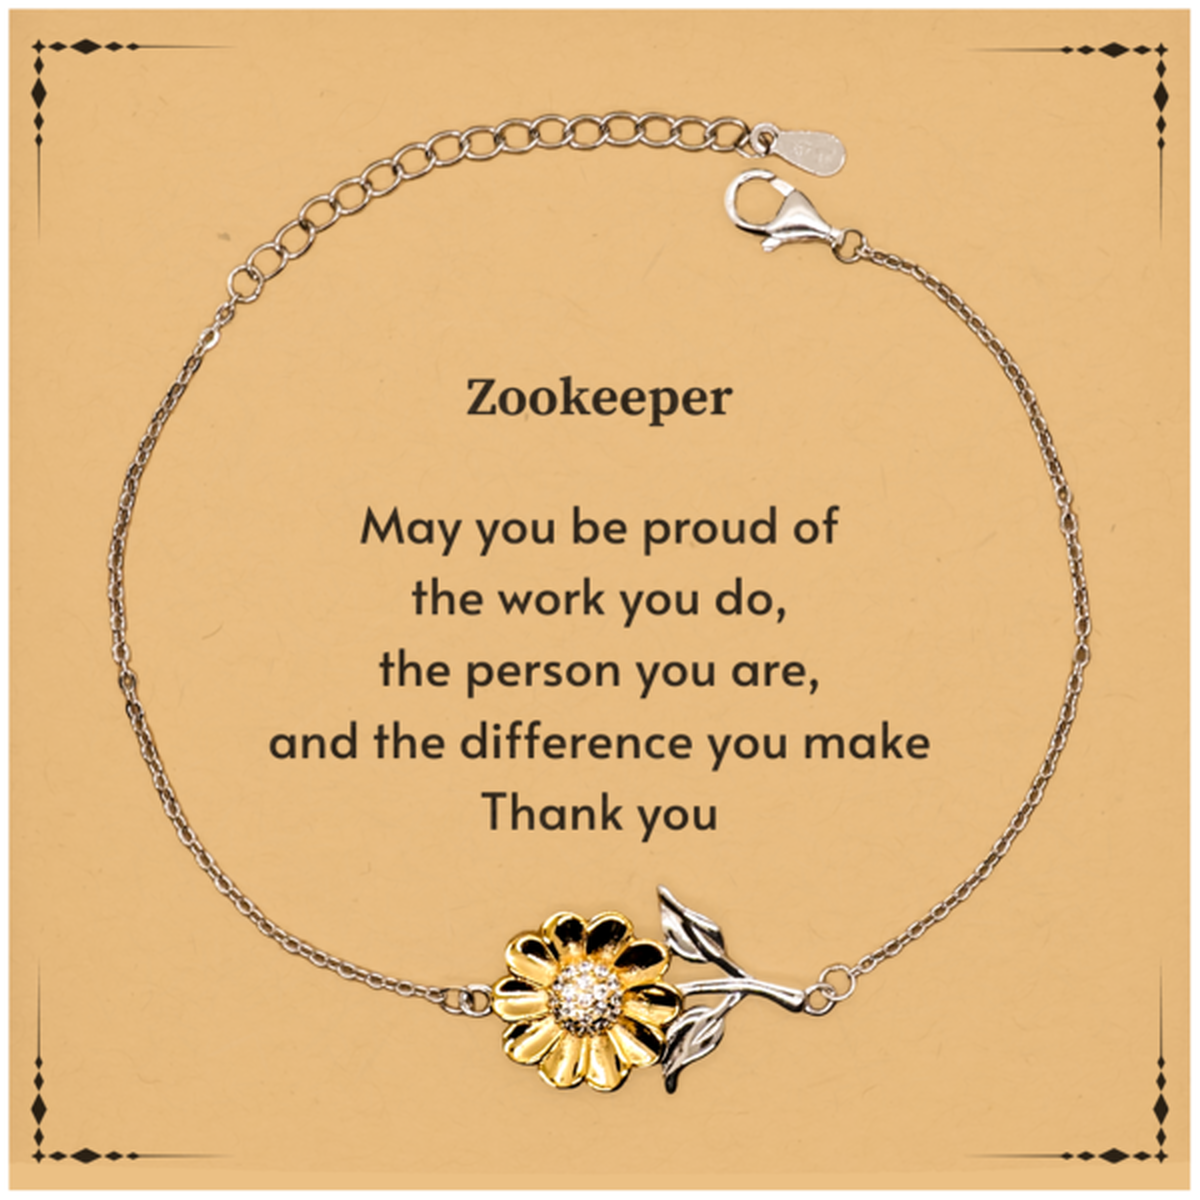 Heartwarming Sunflower Bracelet Retirement Coworkers Gifts for Zookeeper, Zookeeper May You be proud of the work you do, the person you are Gifts for Boss Men Women Friends